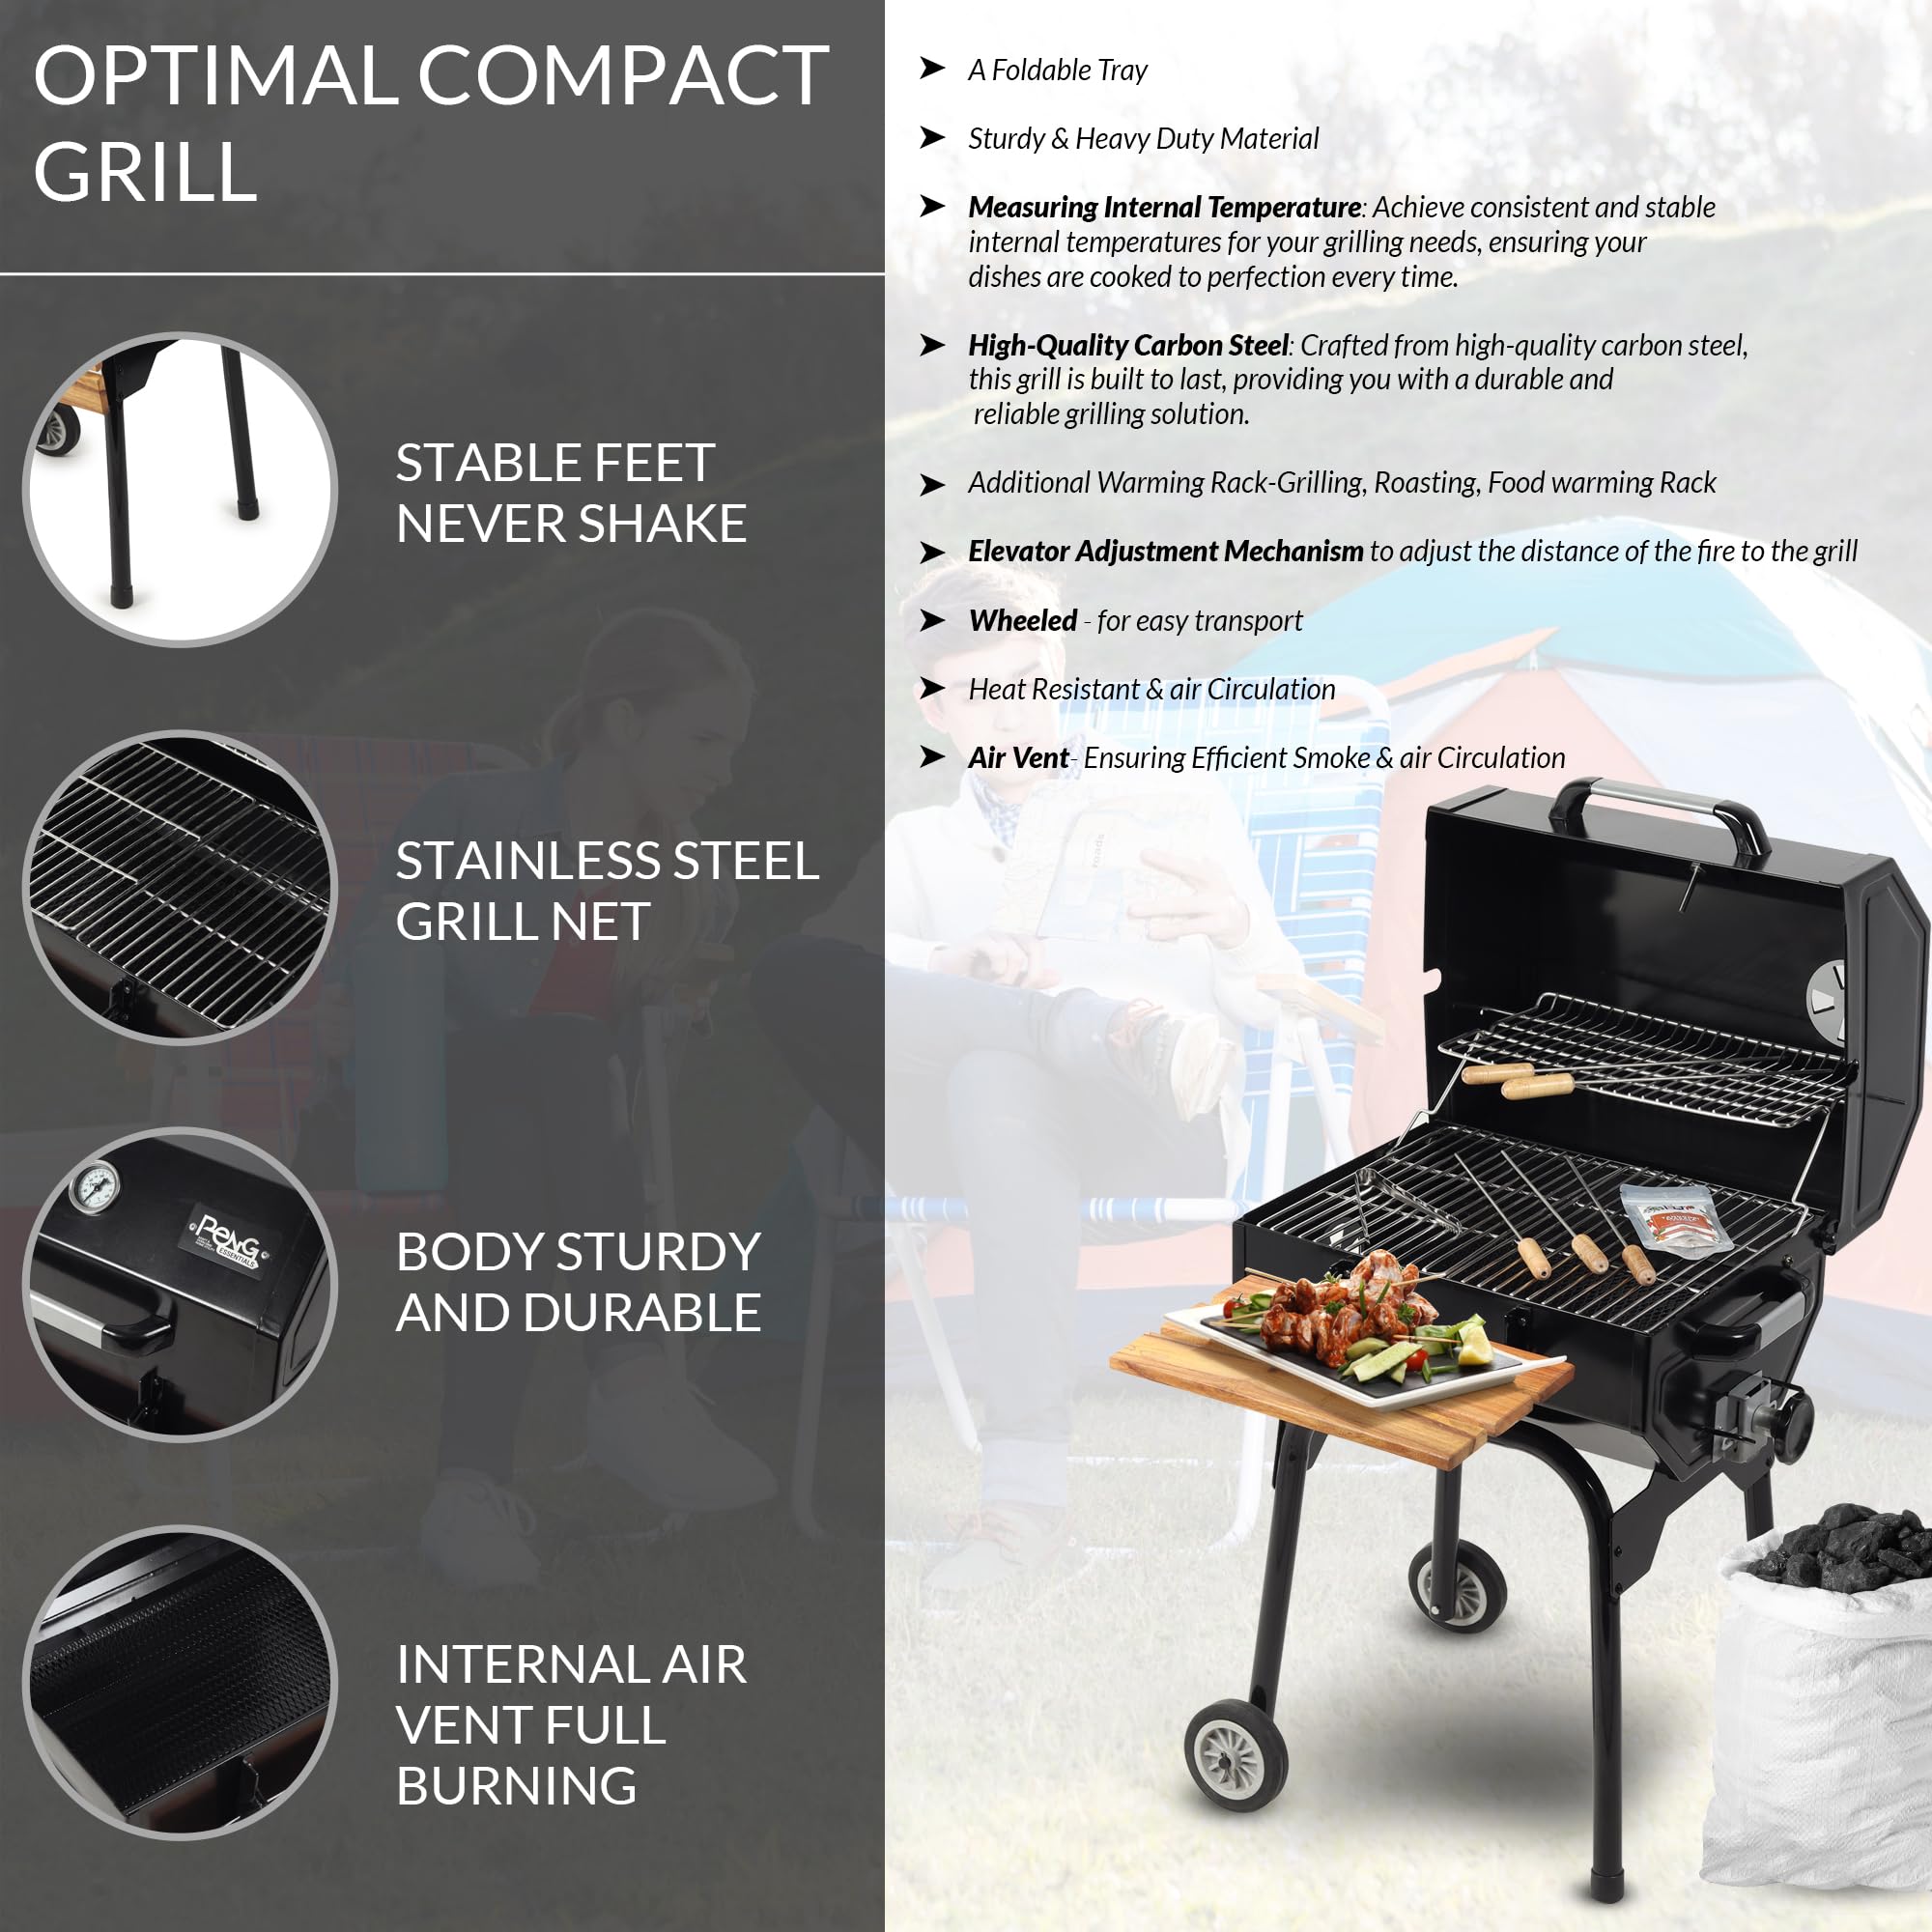 FlameMaster Pro Barbeque With Accessories for Home & outdoor | Large Cooking Area, Easy Assemble, Additional Warming Rack | Charcoal Griller BBQ With 10 Premium Barbecue Accessories